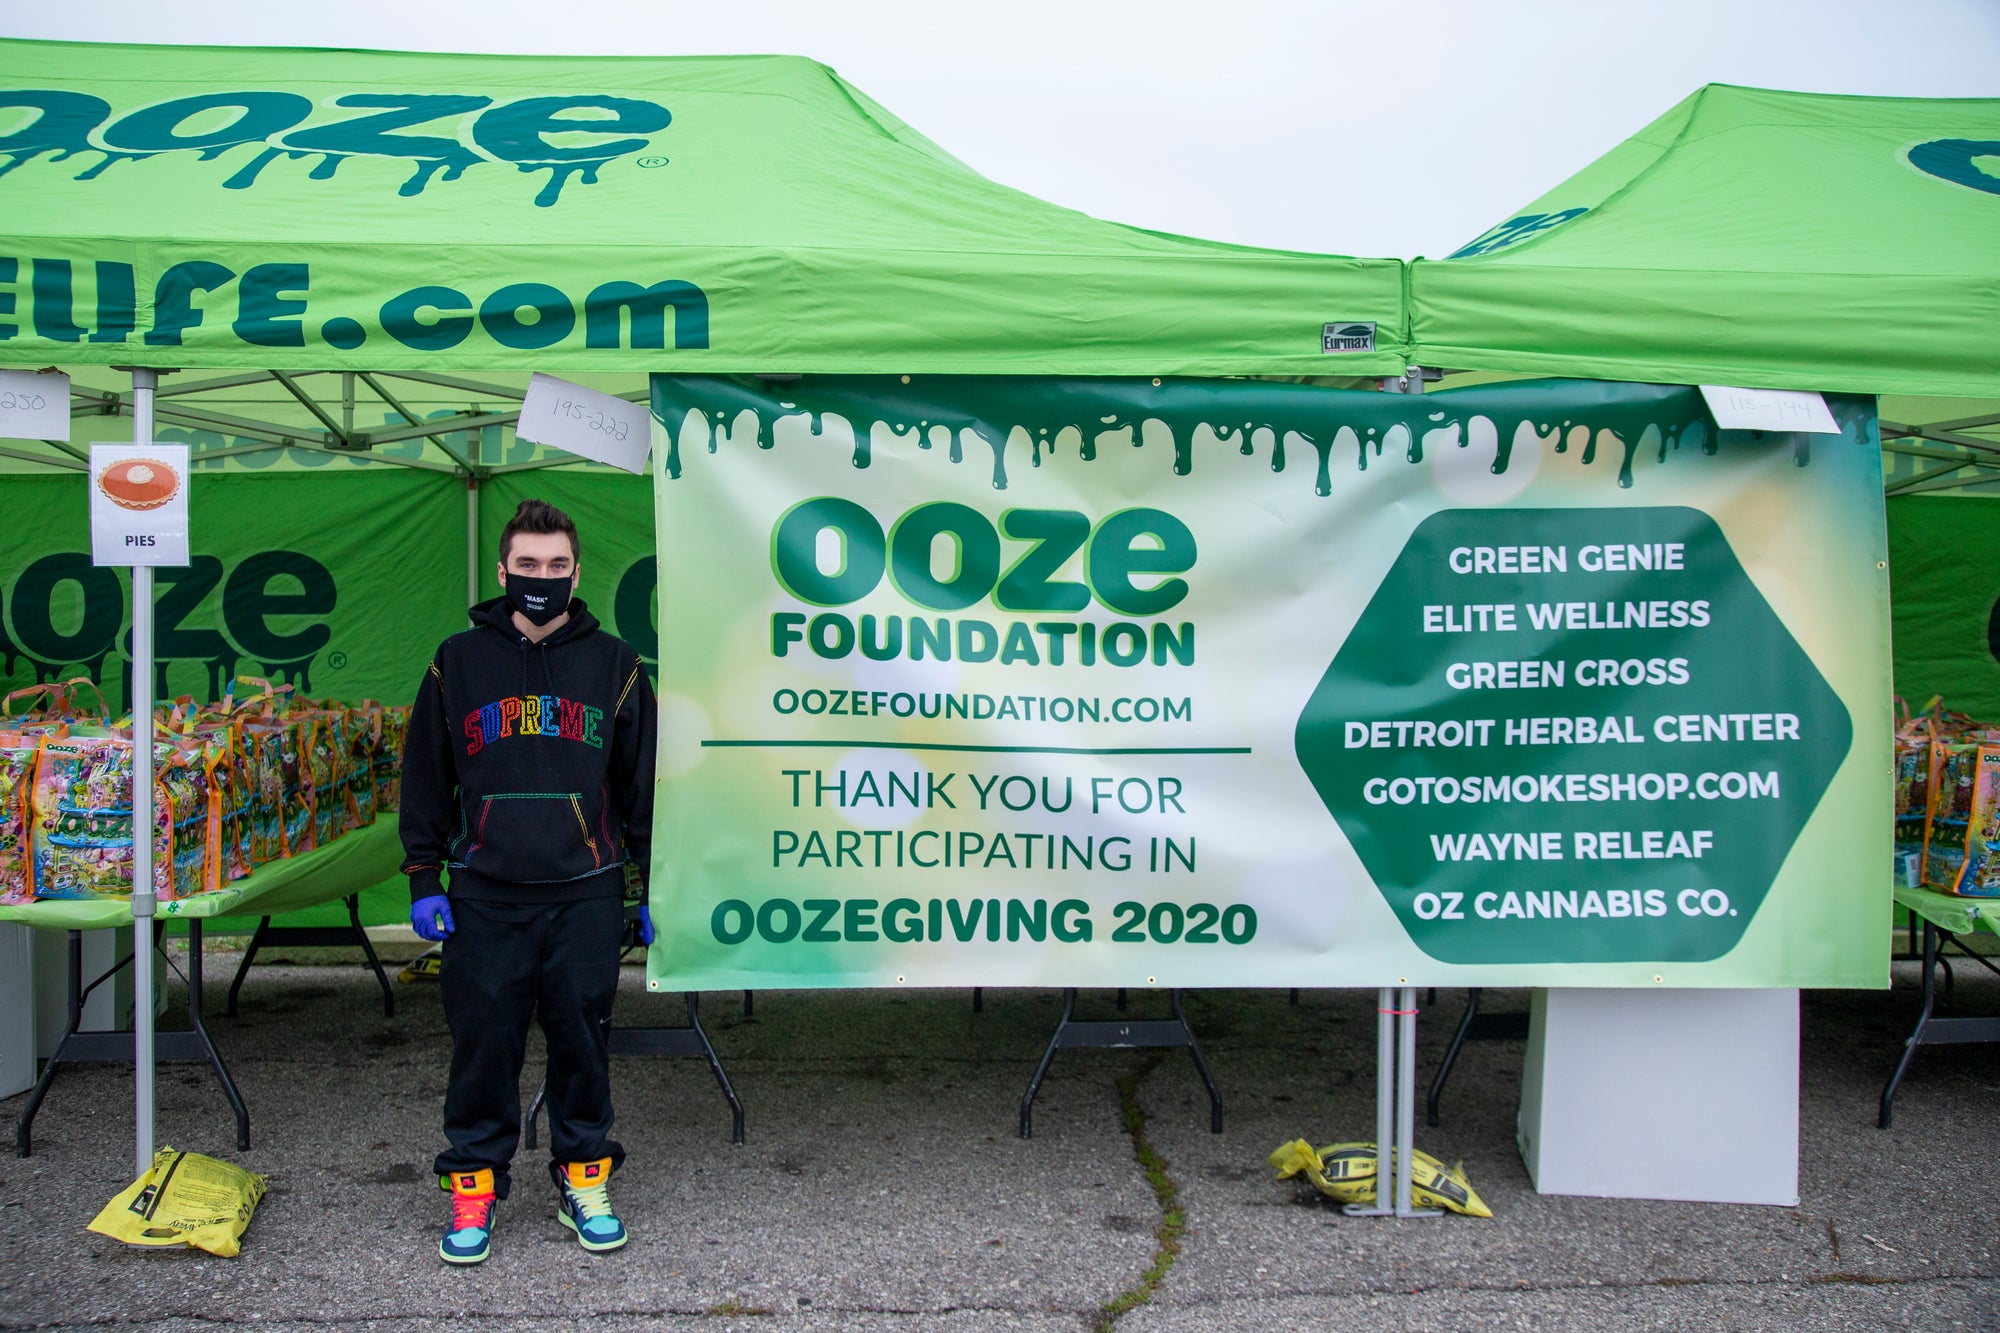 A young man wearing a black face mask and black track suit stands next to the Ooze Foundation Oozegiving banner. He is under the green Ooze tent in front of the donation gift bags.